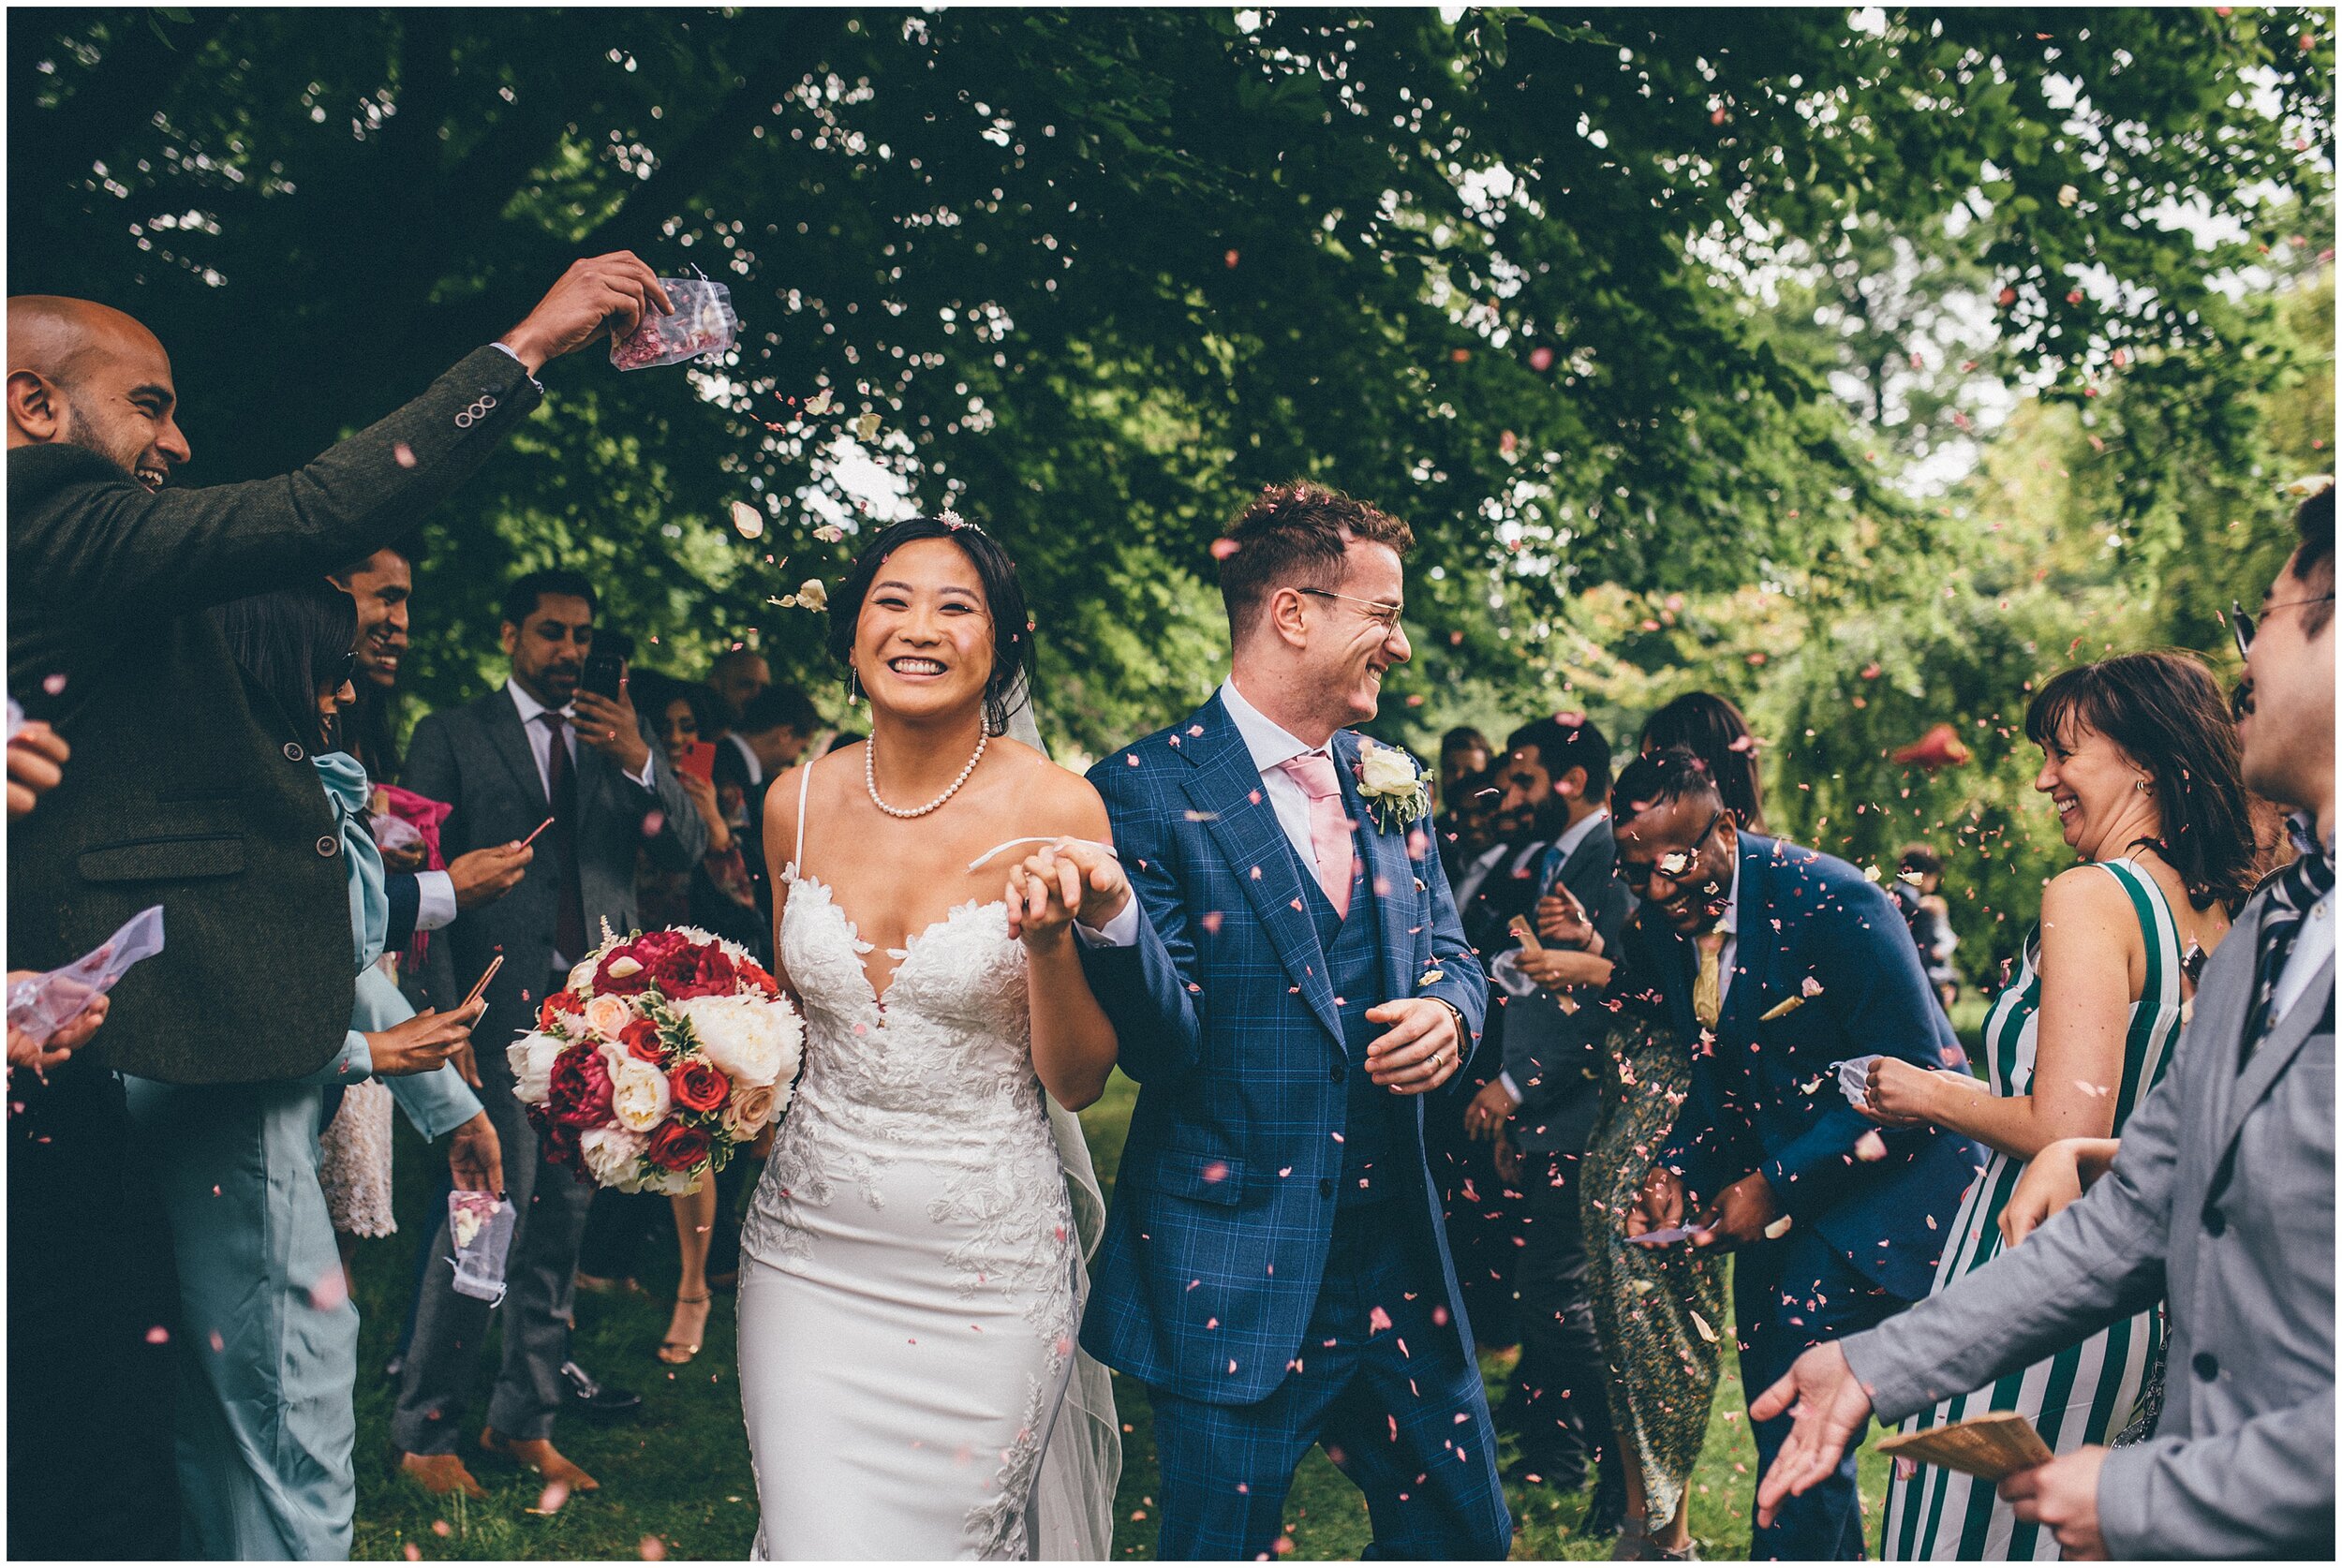 Bride and groom laugh as they have confetti thrown at them.